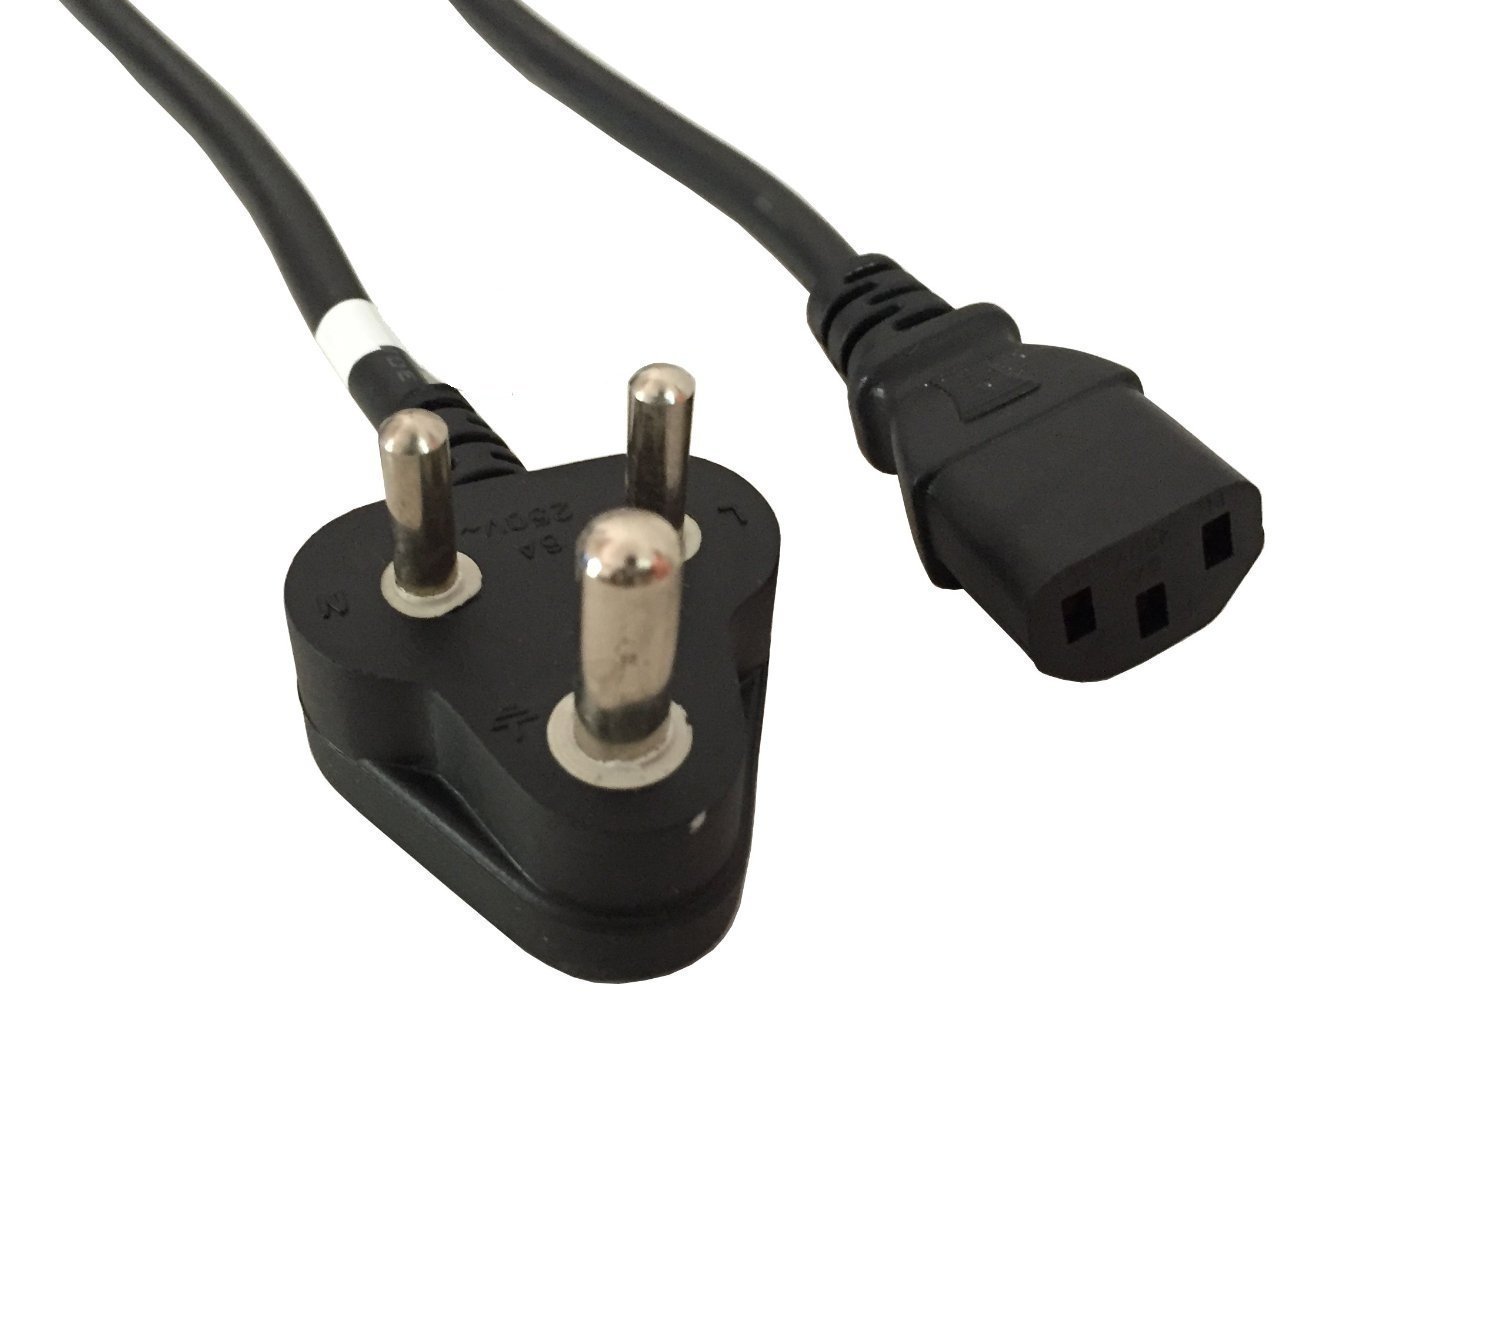 ClassyTek 3 Pin Computer Power Cord Cable for Computer PC SMPS 1.5 Meter or 4.9 Feet